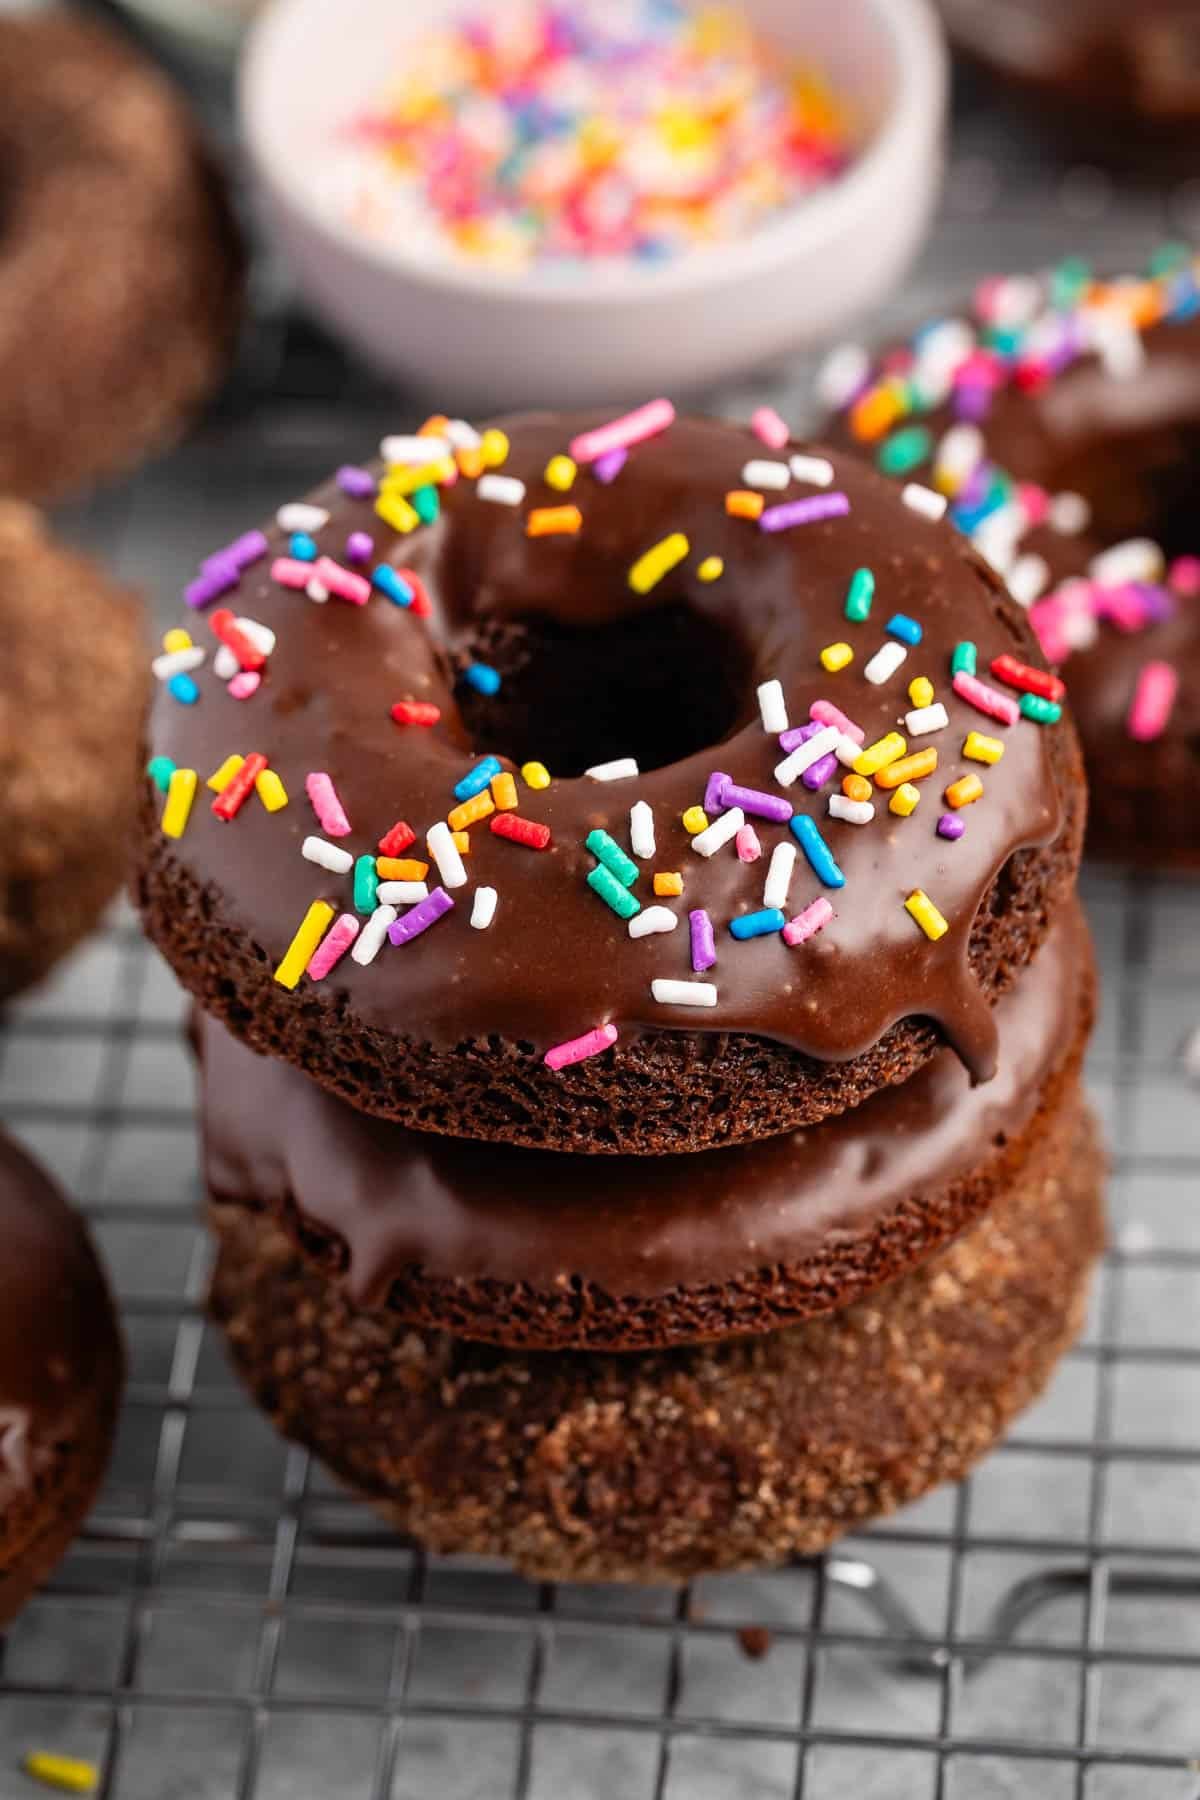 stacked chocolate donuts with chocolate glaze and colorful sprinkles on top,